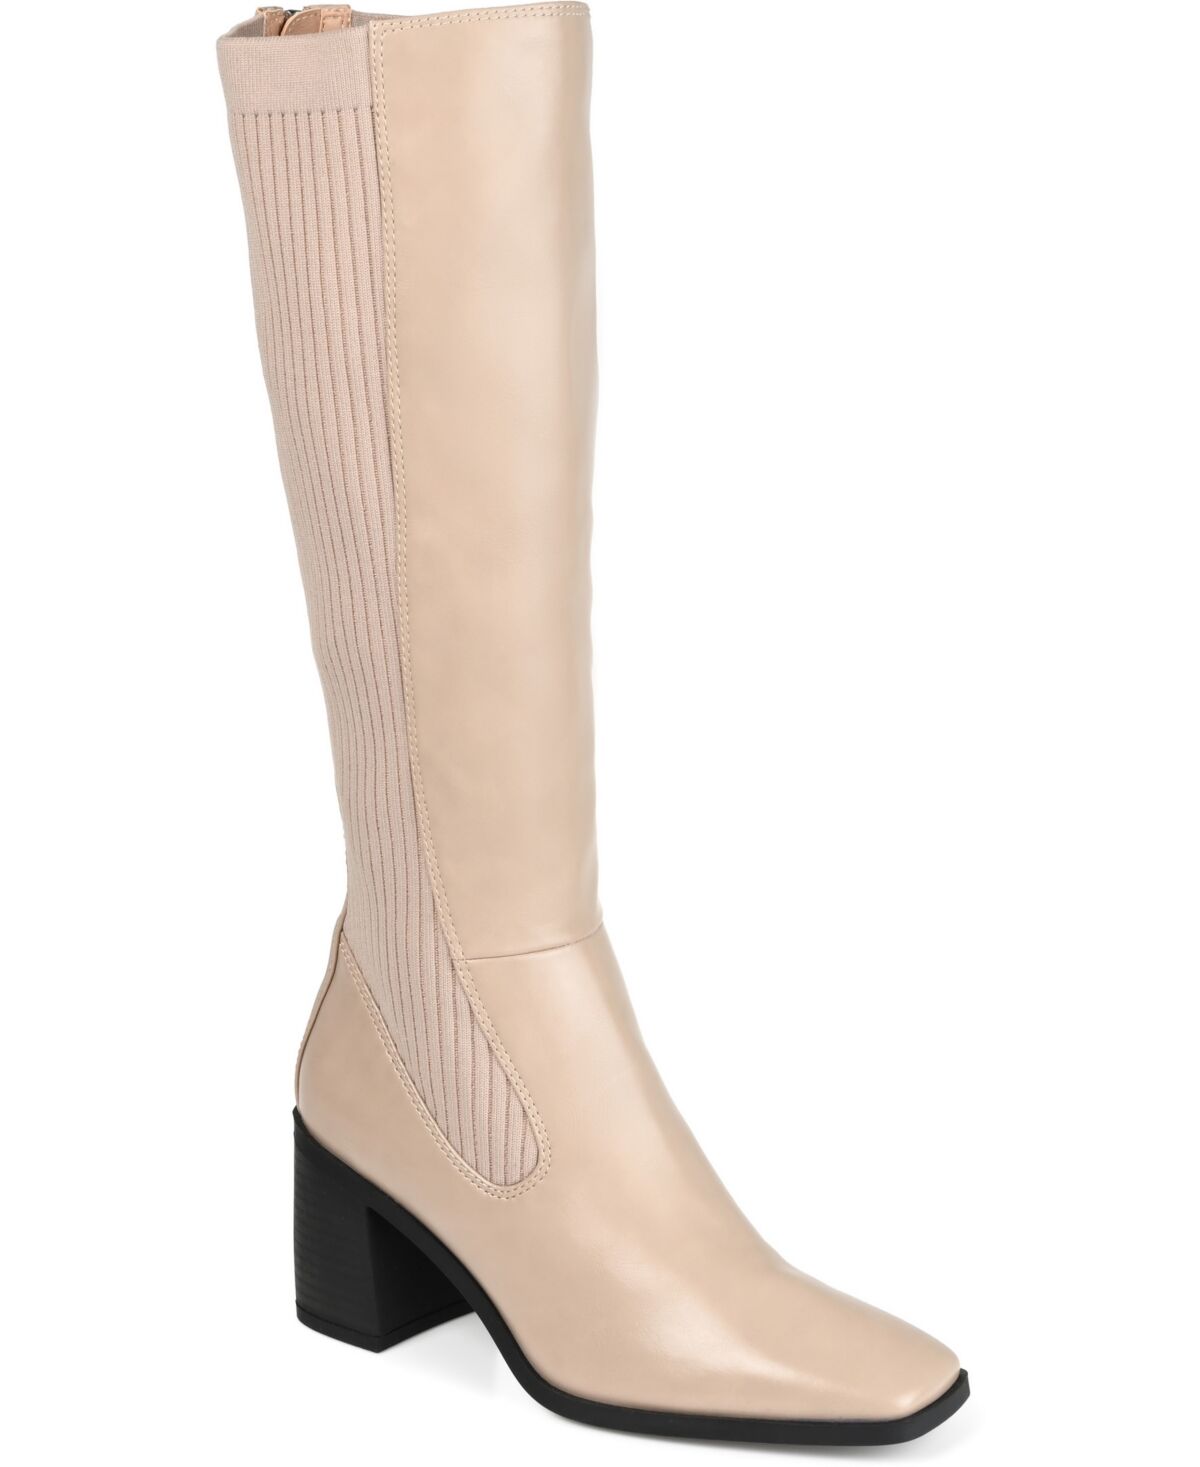 Journee Collection Women's Winny Knee High Boots - Taupe